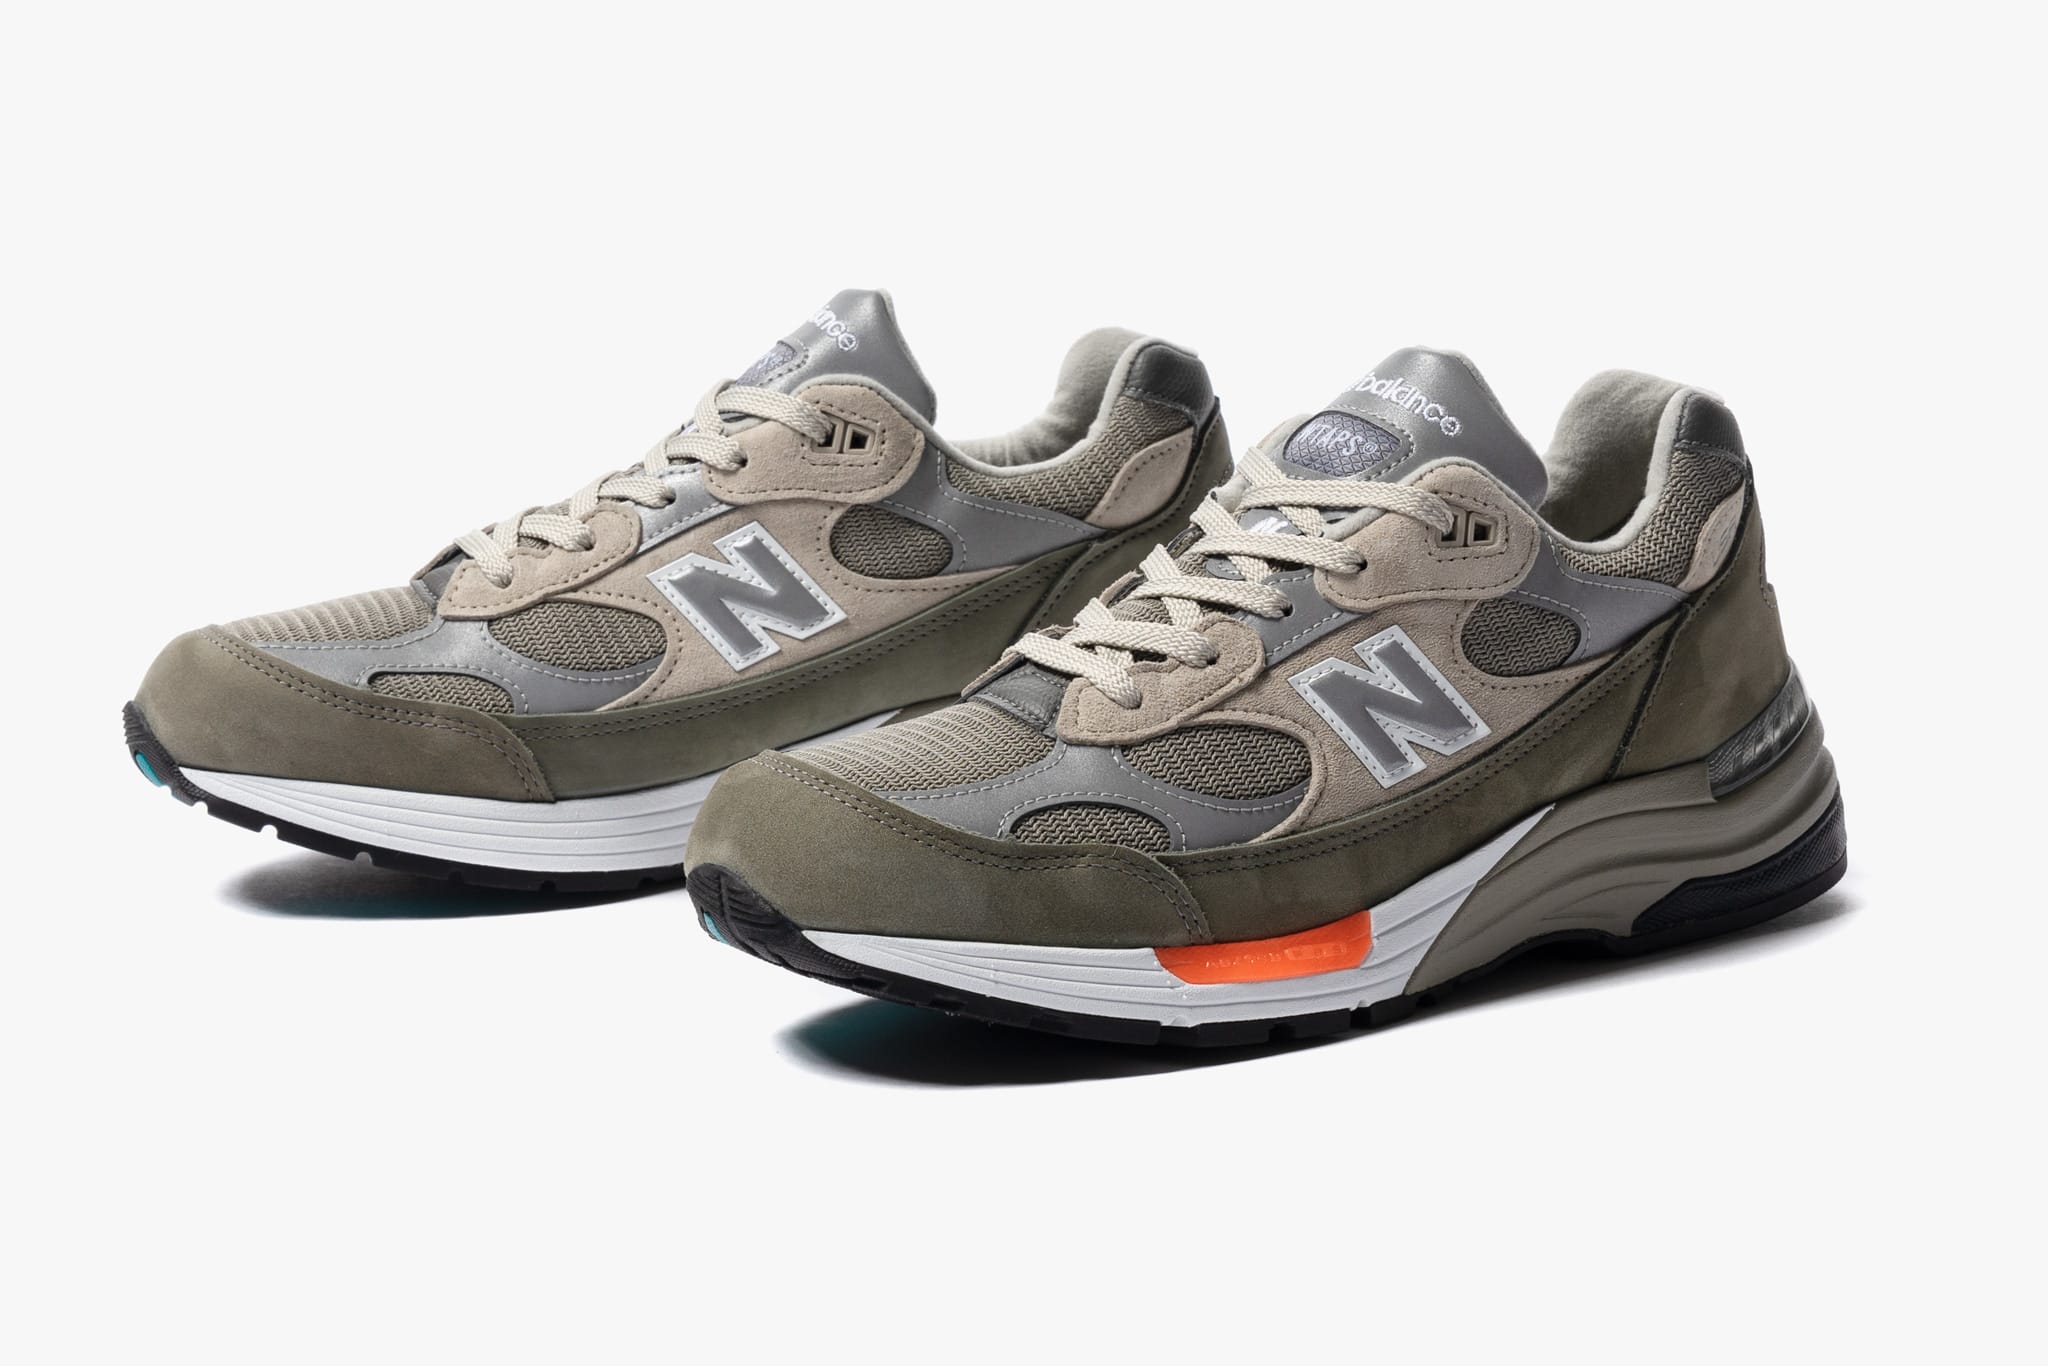 New Balance x WTAPS M992WT | Release Date: 05.01.20 | HAVEN